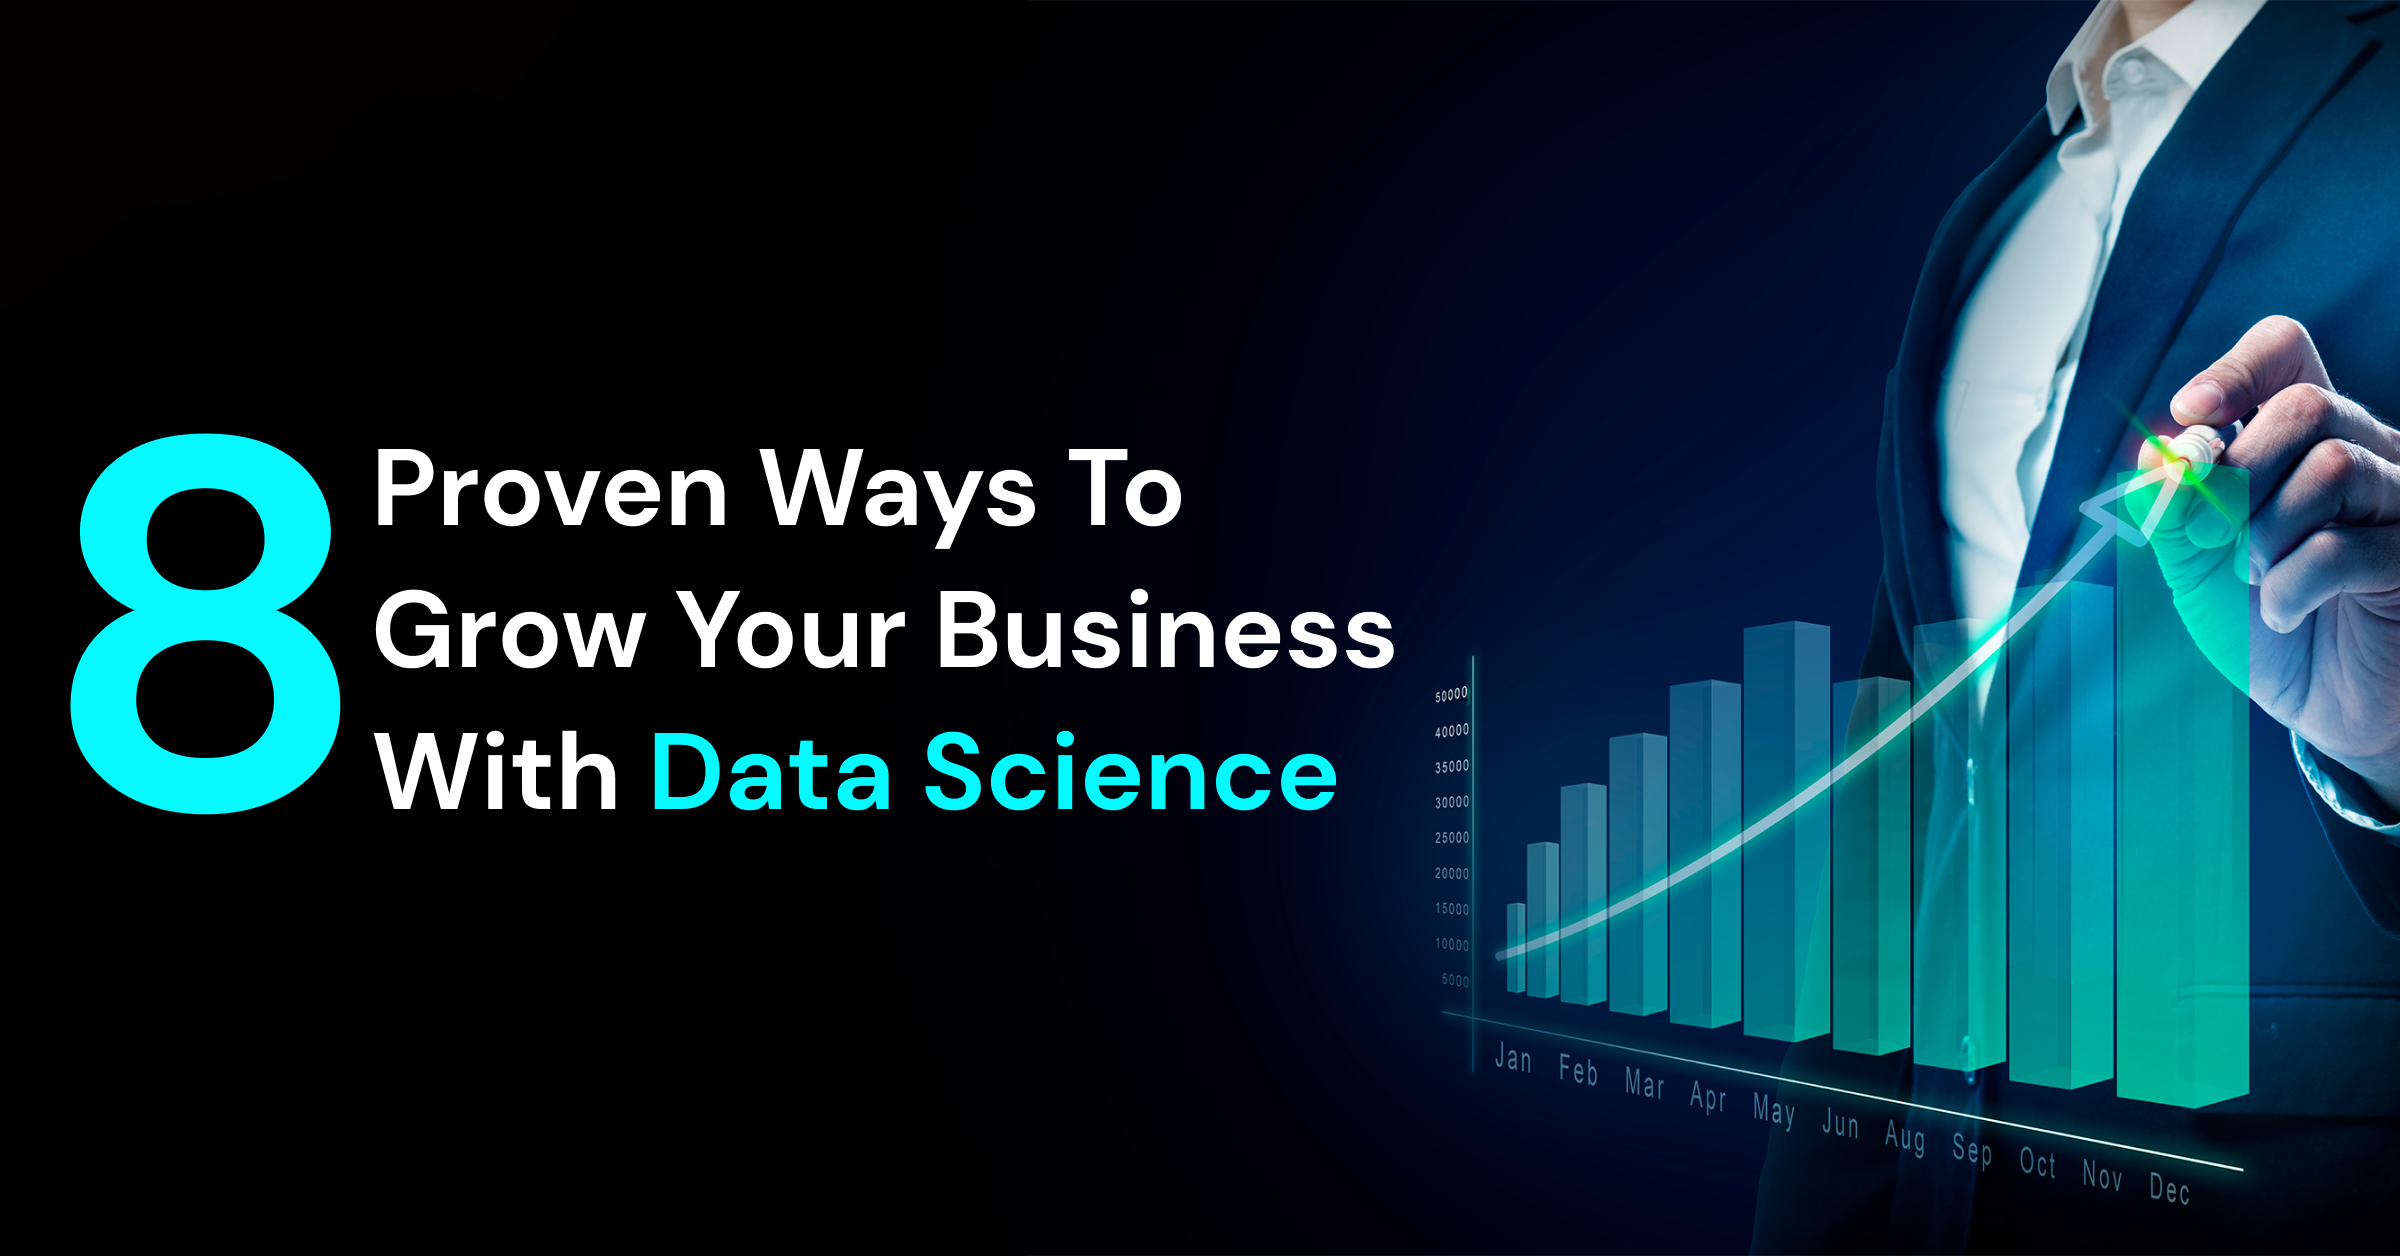 8 proven ways to grow your business with Data Science